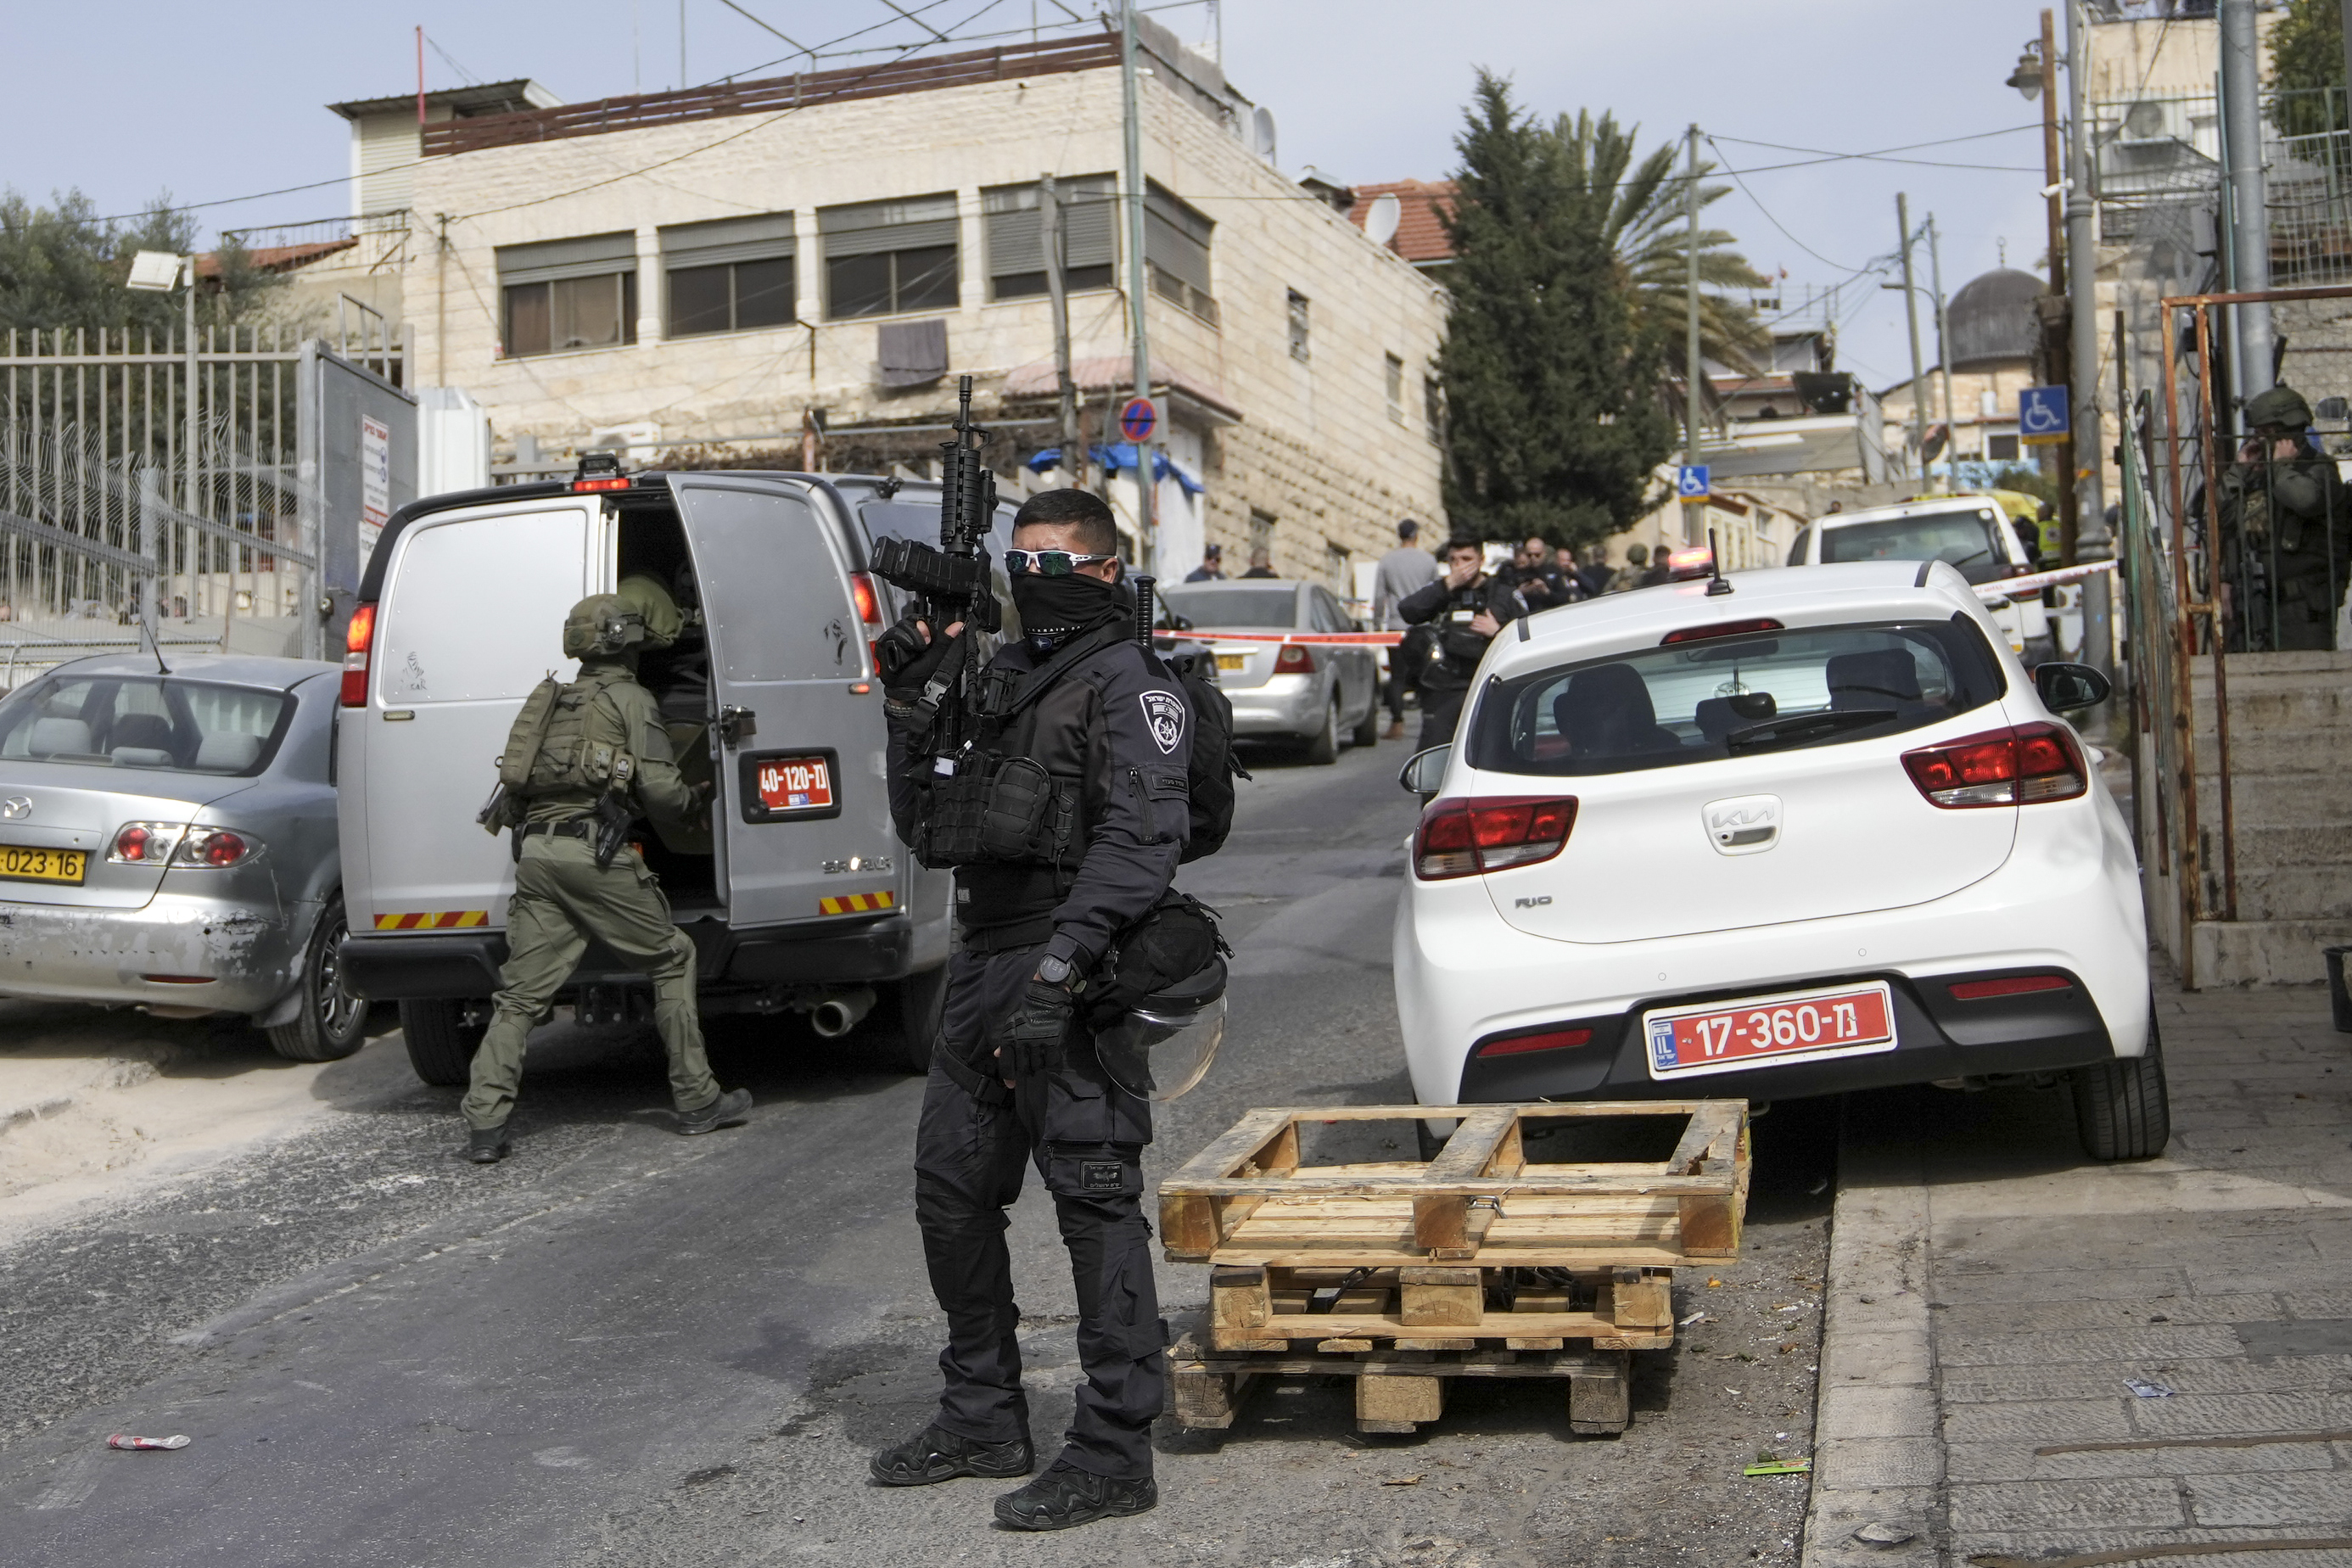 An Israeli agent guards the scene of a shooting in East Jerusalem, on January 28, 2023. (AP Photo/Mahmoud Illean)